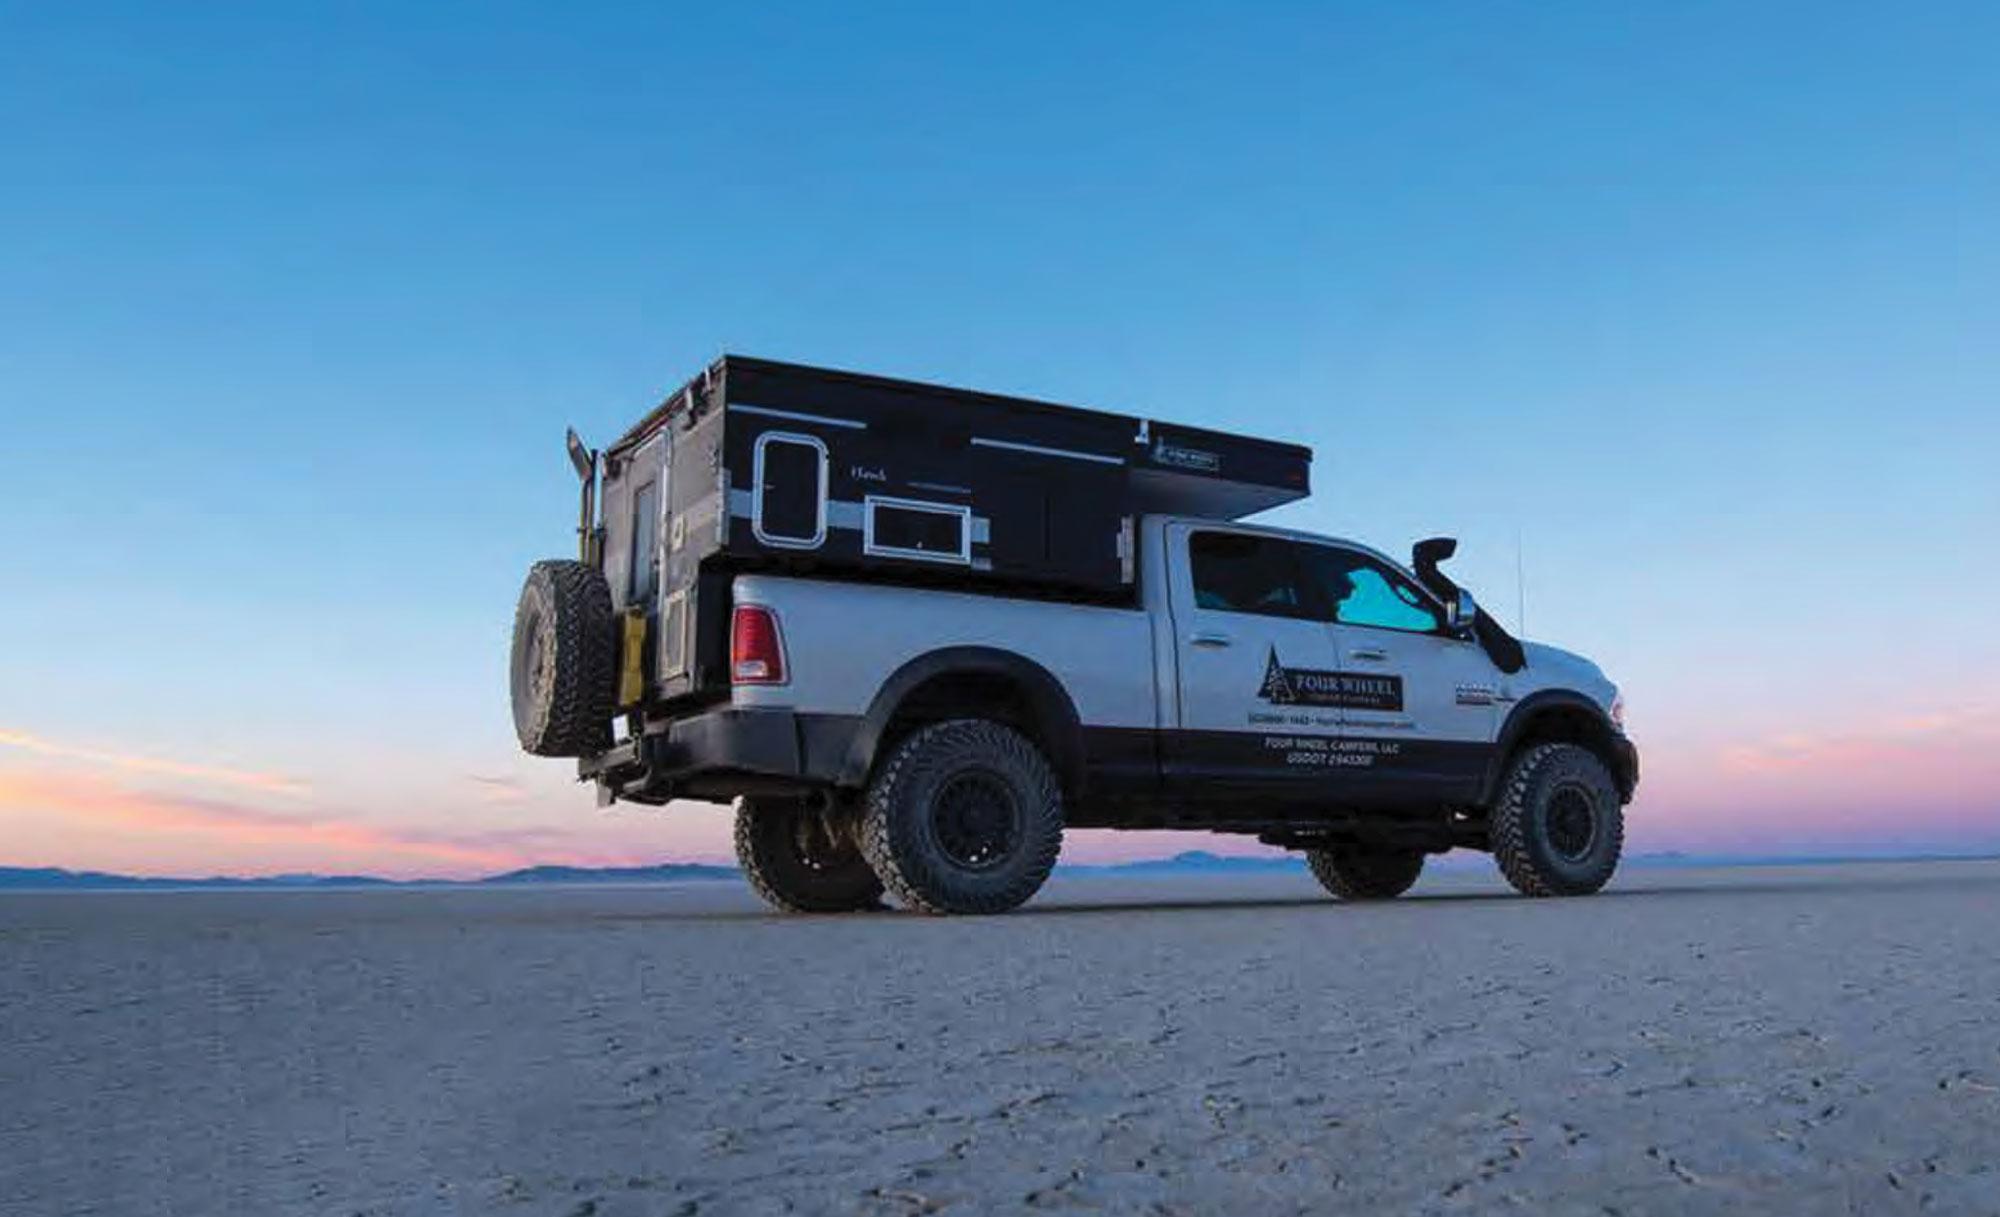 The Ultimate Overlander? – OutdoorX4